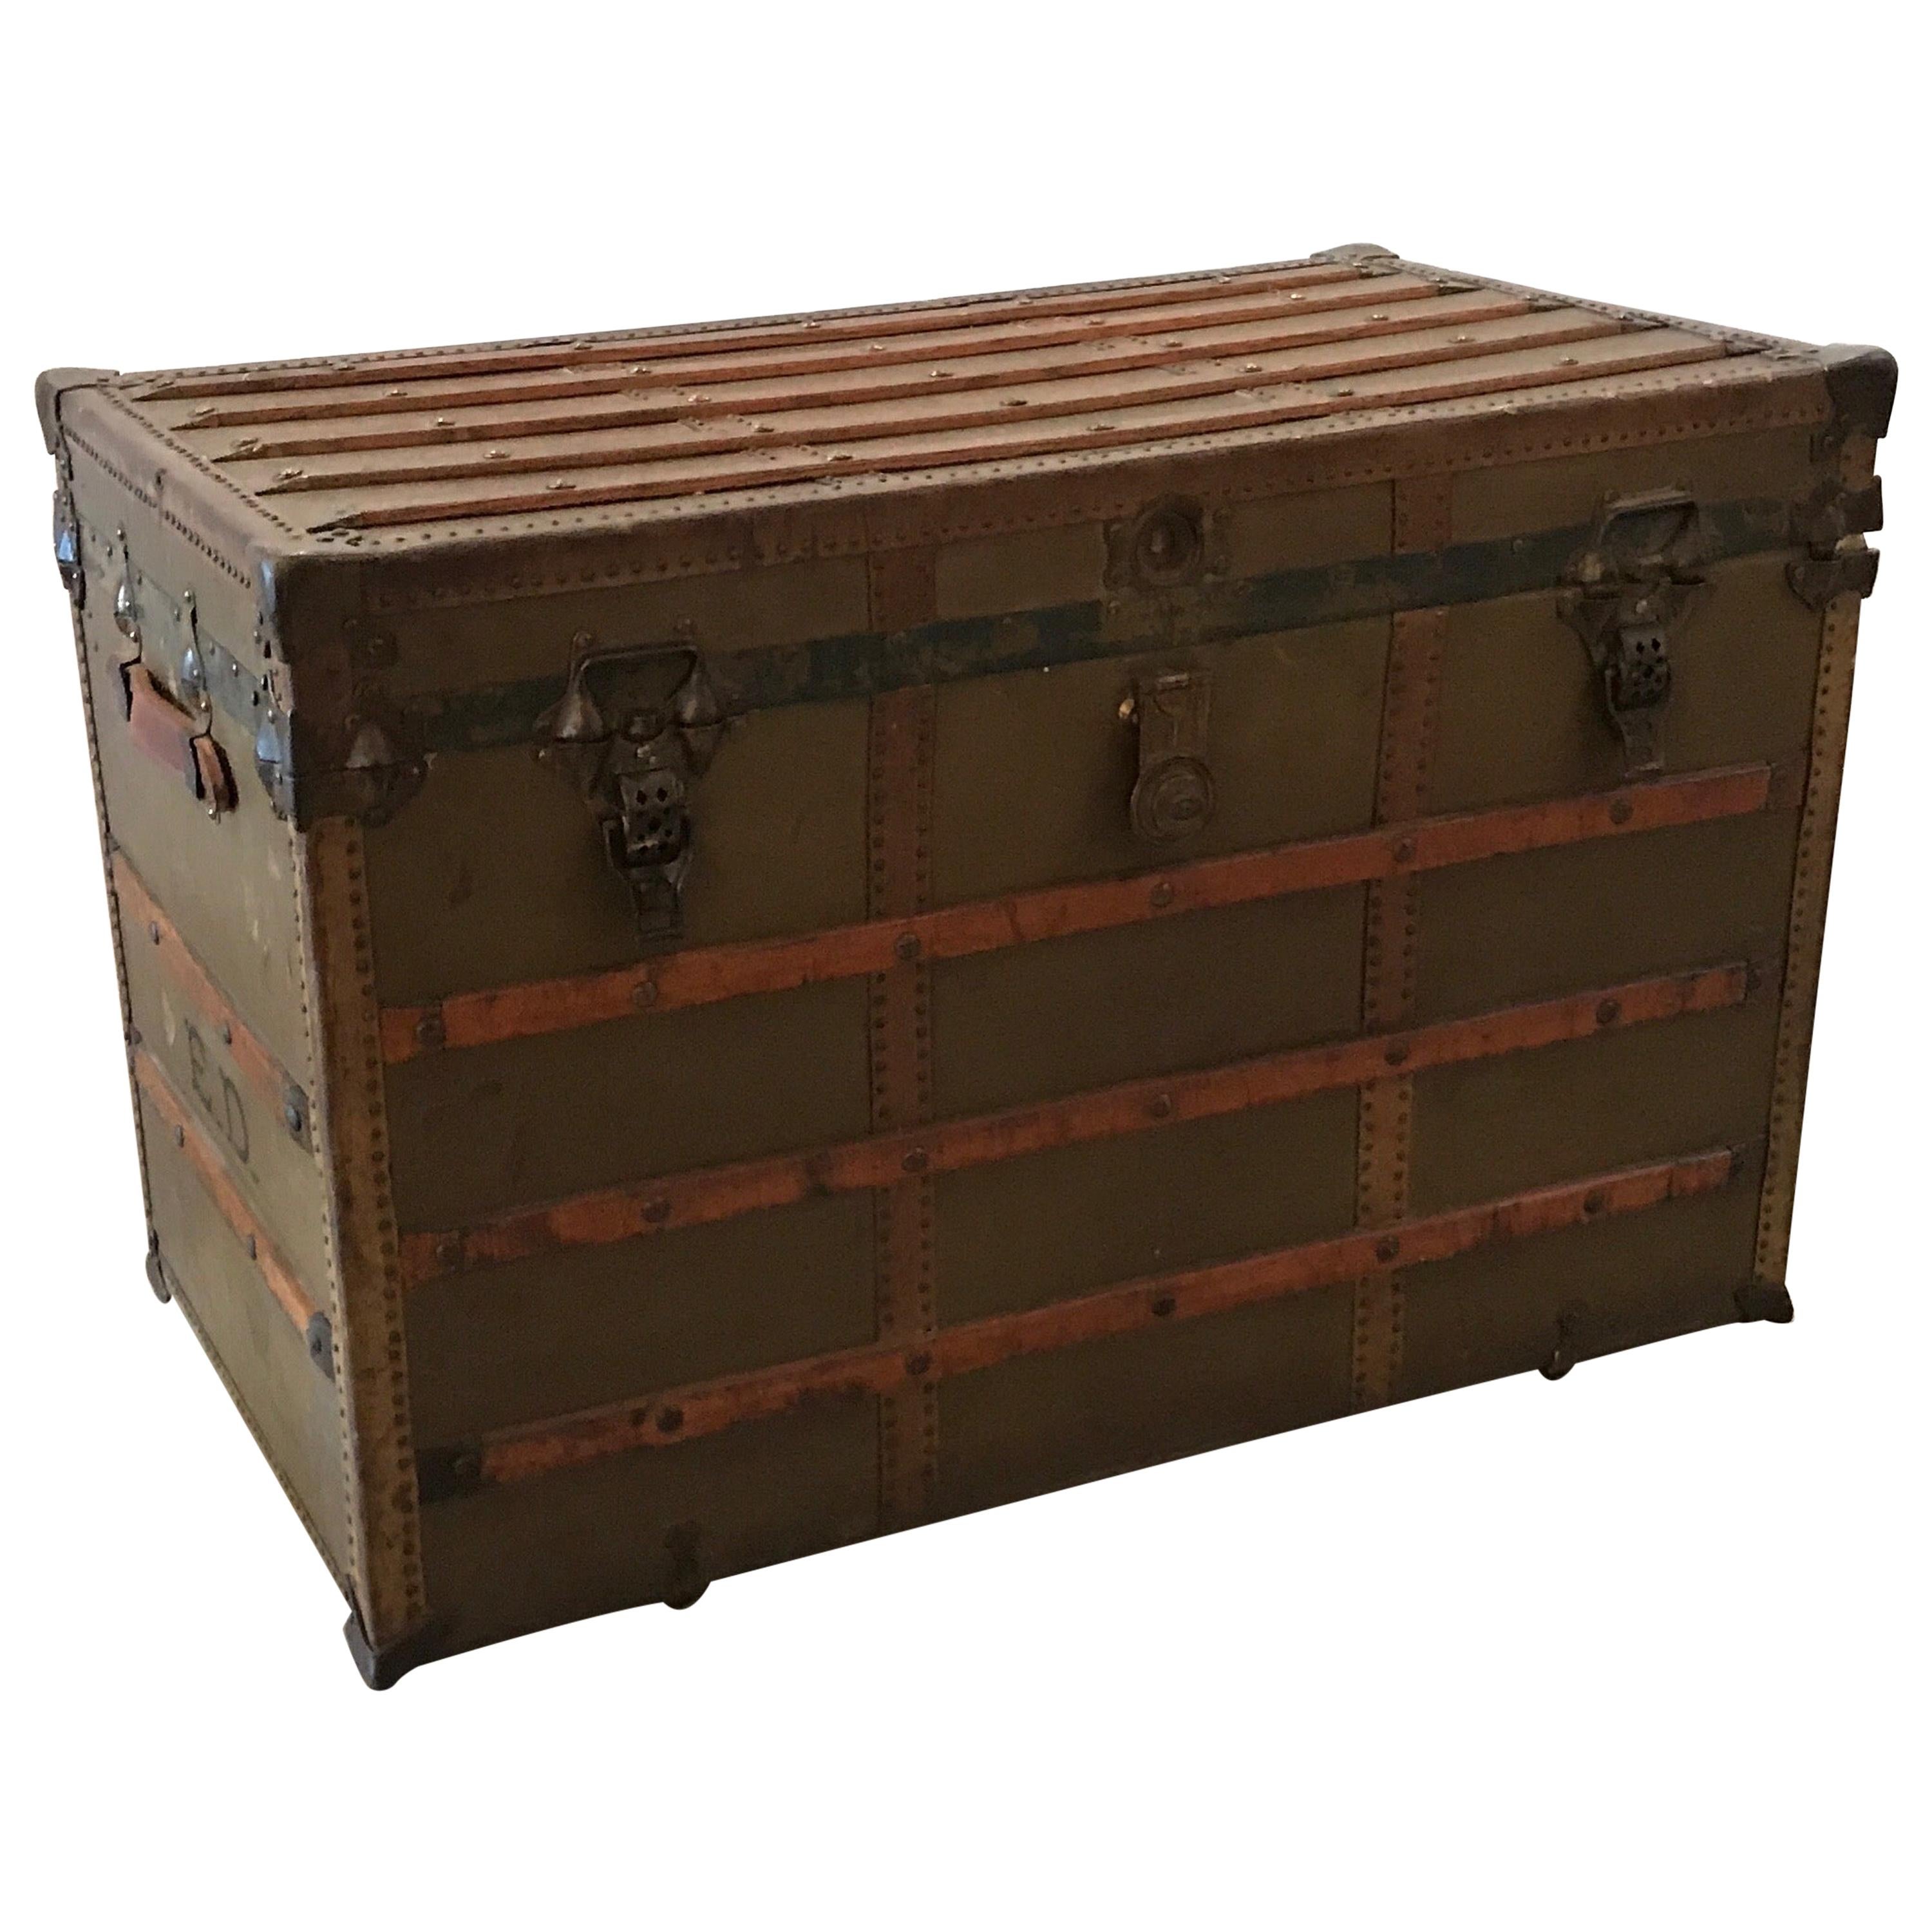 Antique Steamer Trunk with Inside Tray and Compartments, circa 1890